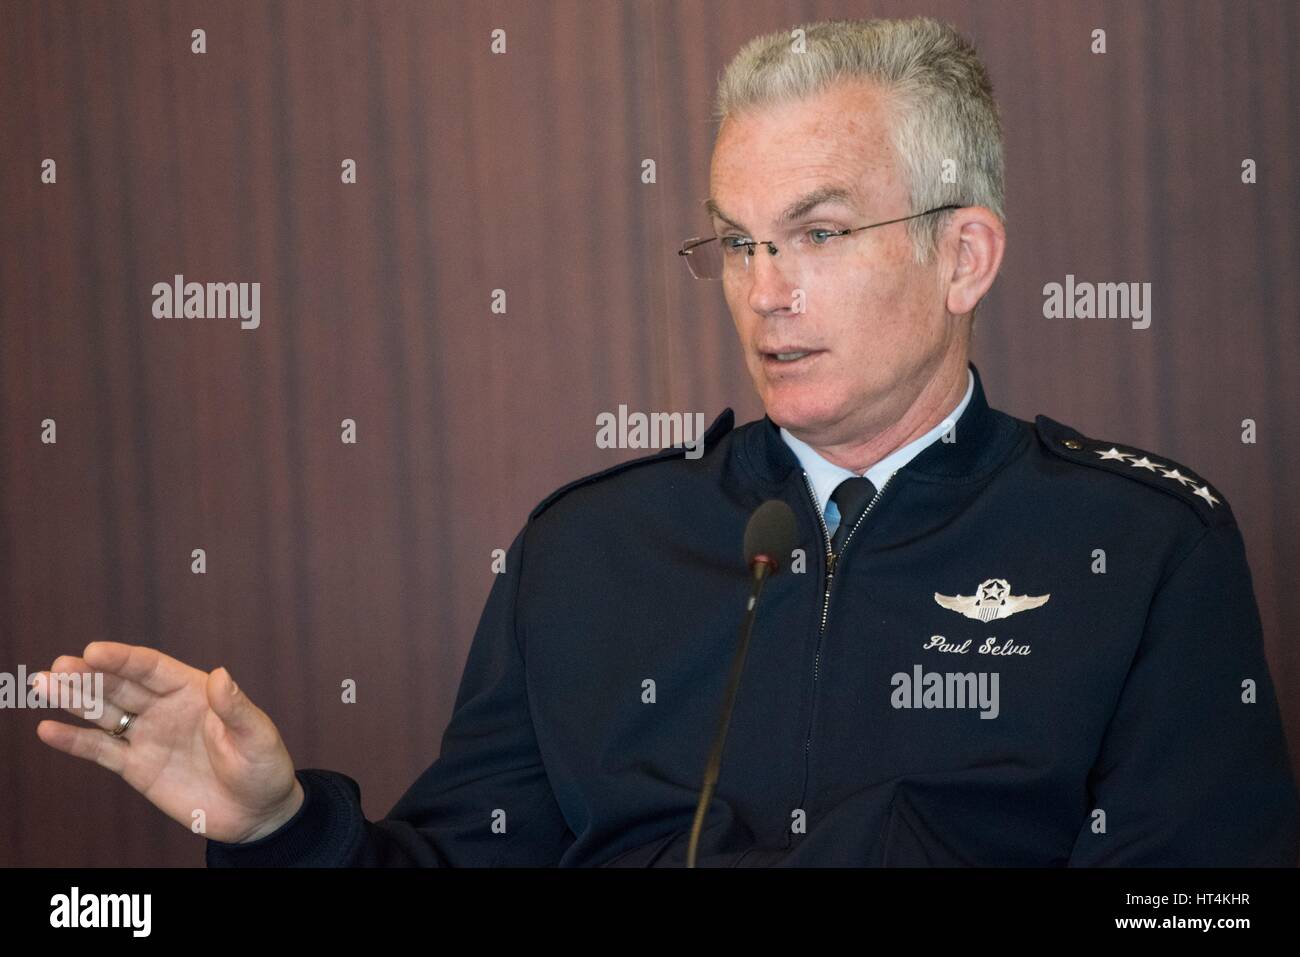 U.S. Joint Chiefs of Staff Vice Chairman Paul Selva speaks to the Air Force about innovation within the Department of Defense February 23, 2017 in Washington, DC. Stock Photo